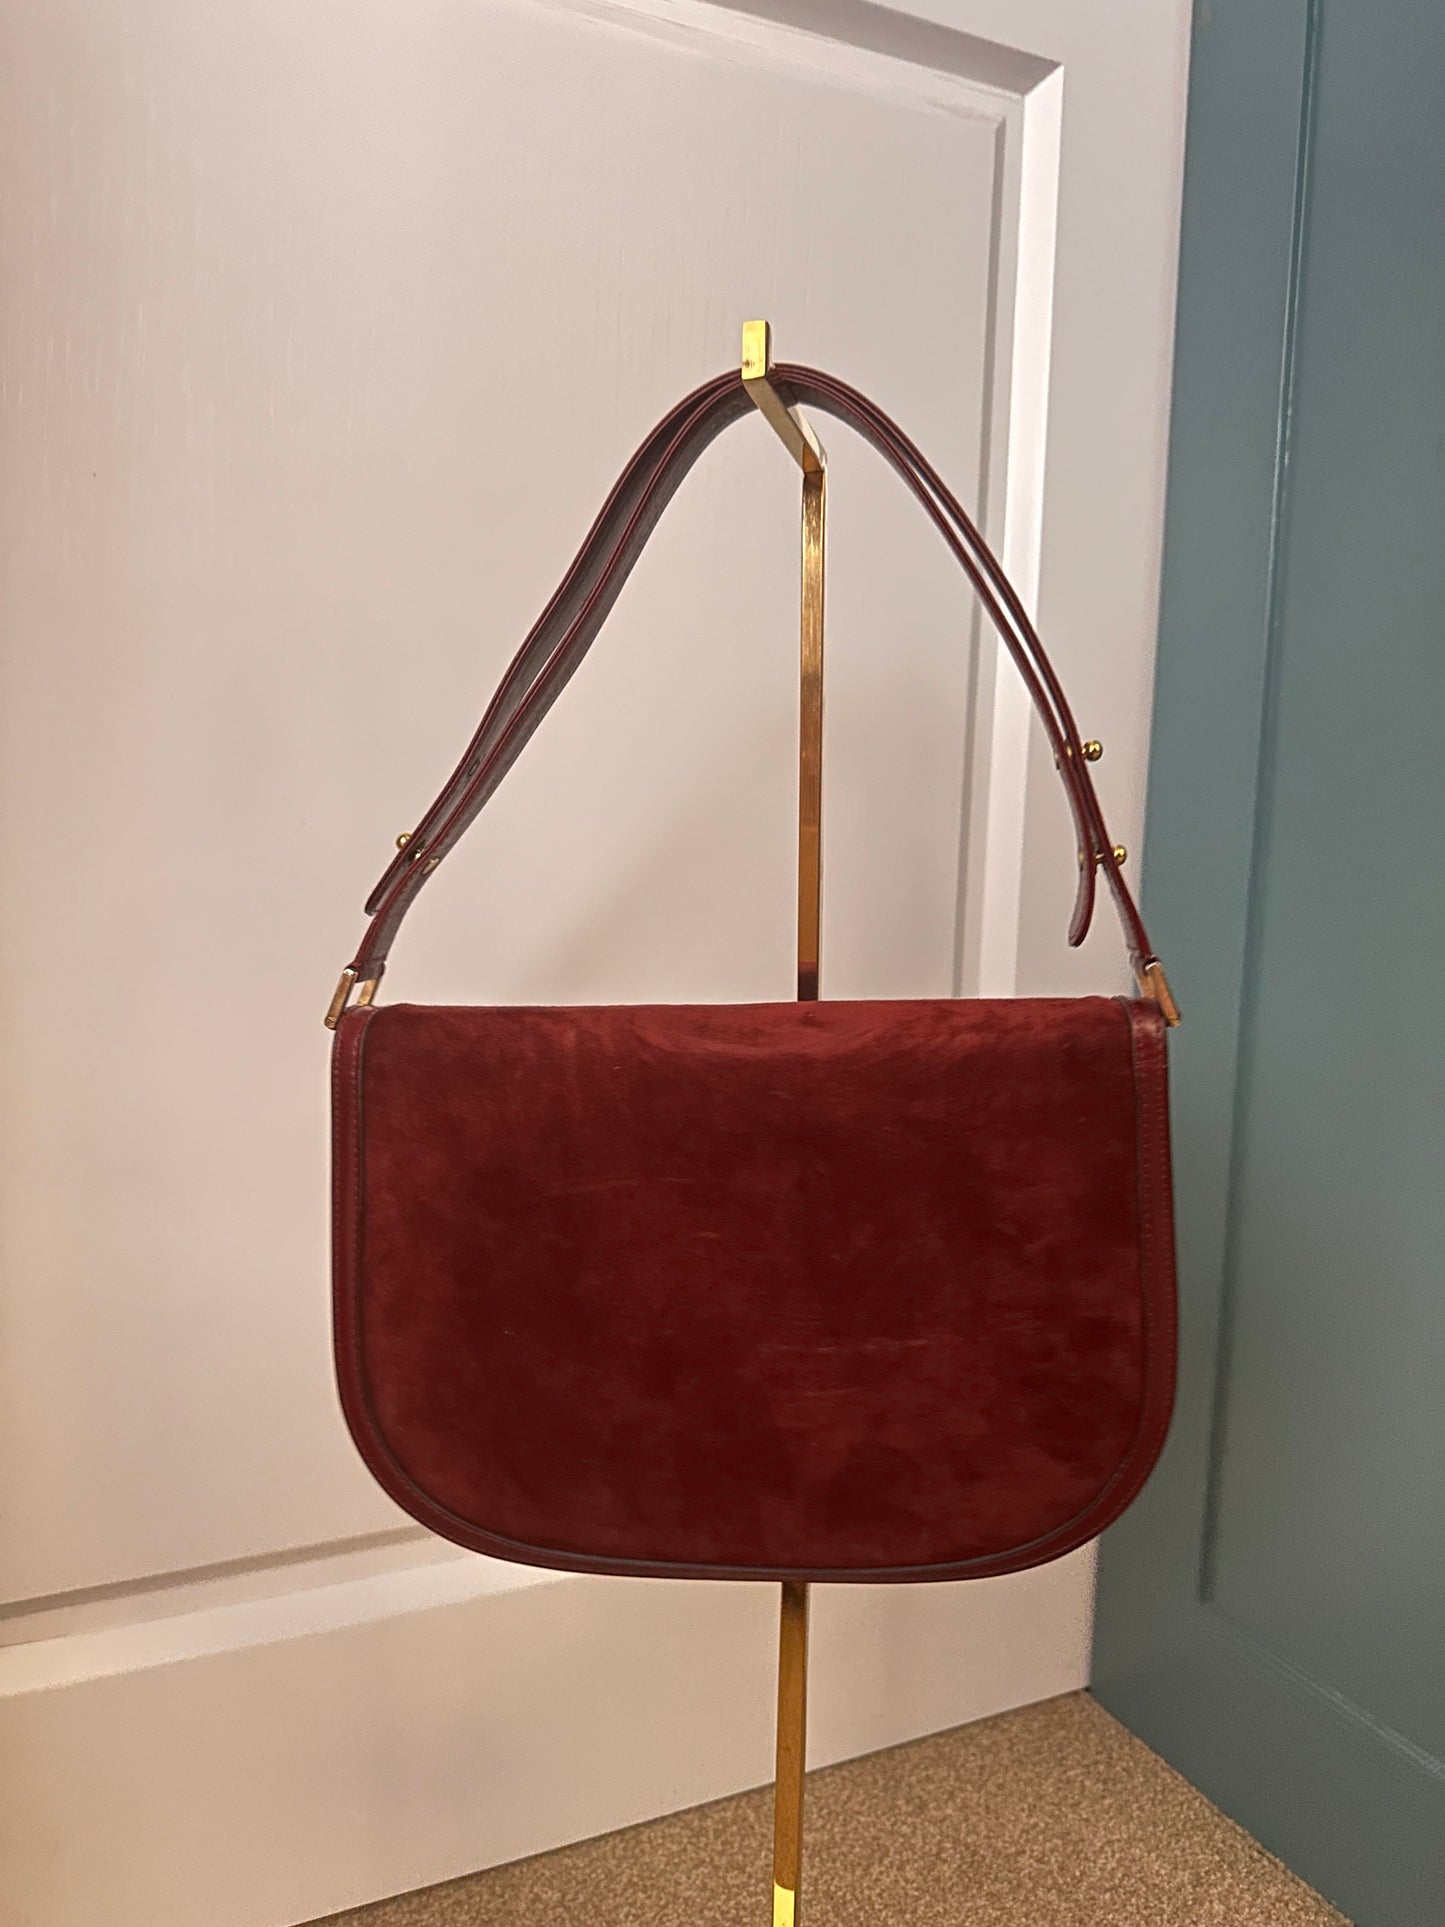 BALLY VINTAGE 100% Authentic Genuine Leather Hand Bag, Deep Red Color, 2000's, Great Condition, Rare